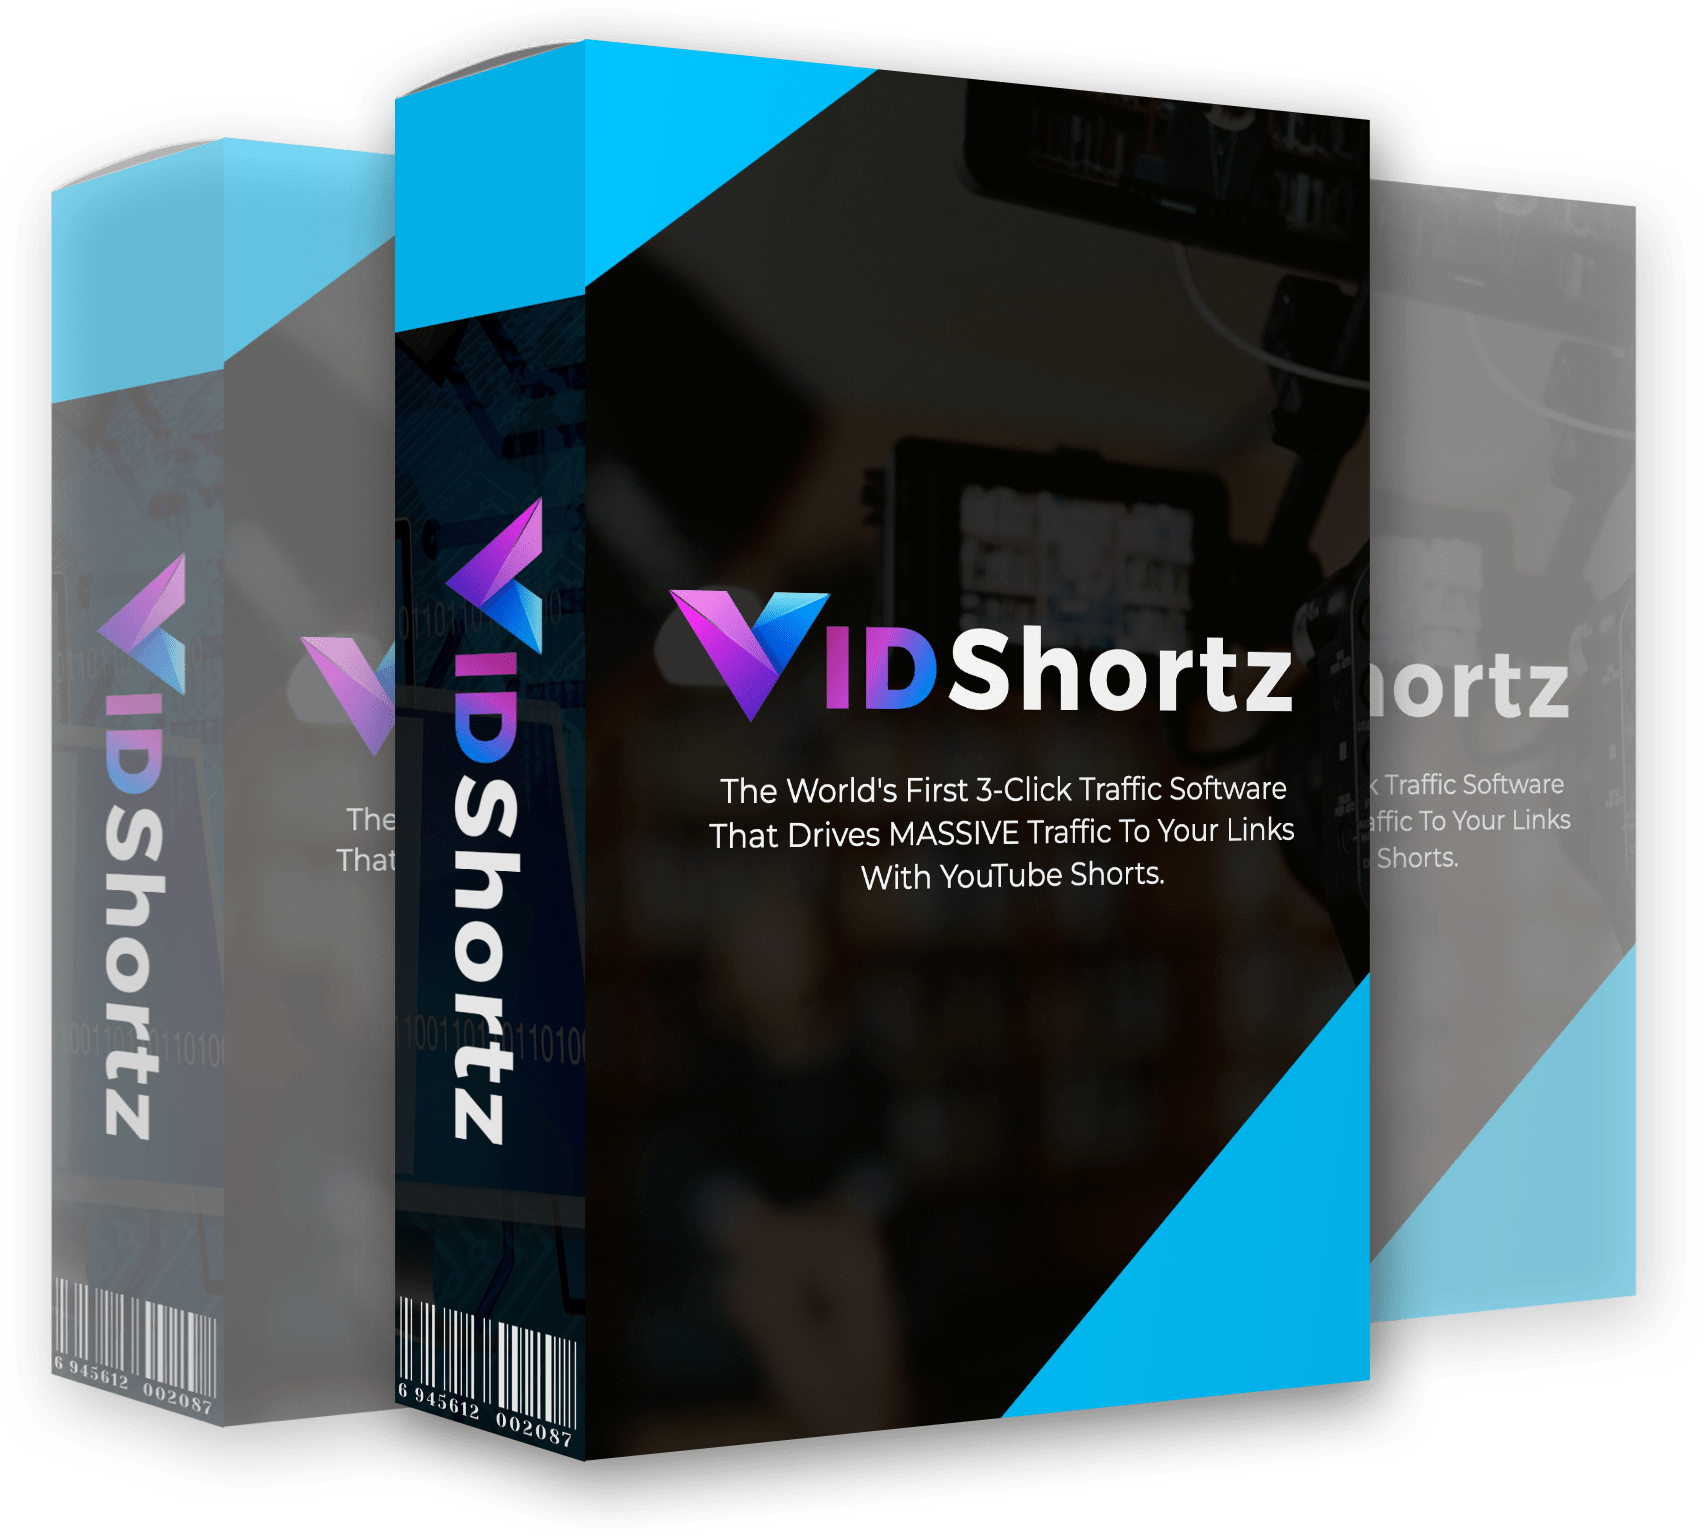 Vidshortz Review and Bonuses- Create YouTube shorts to get unlimited traffic